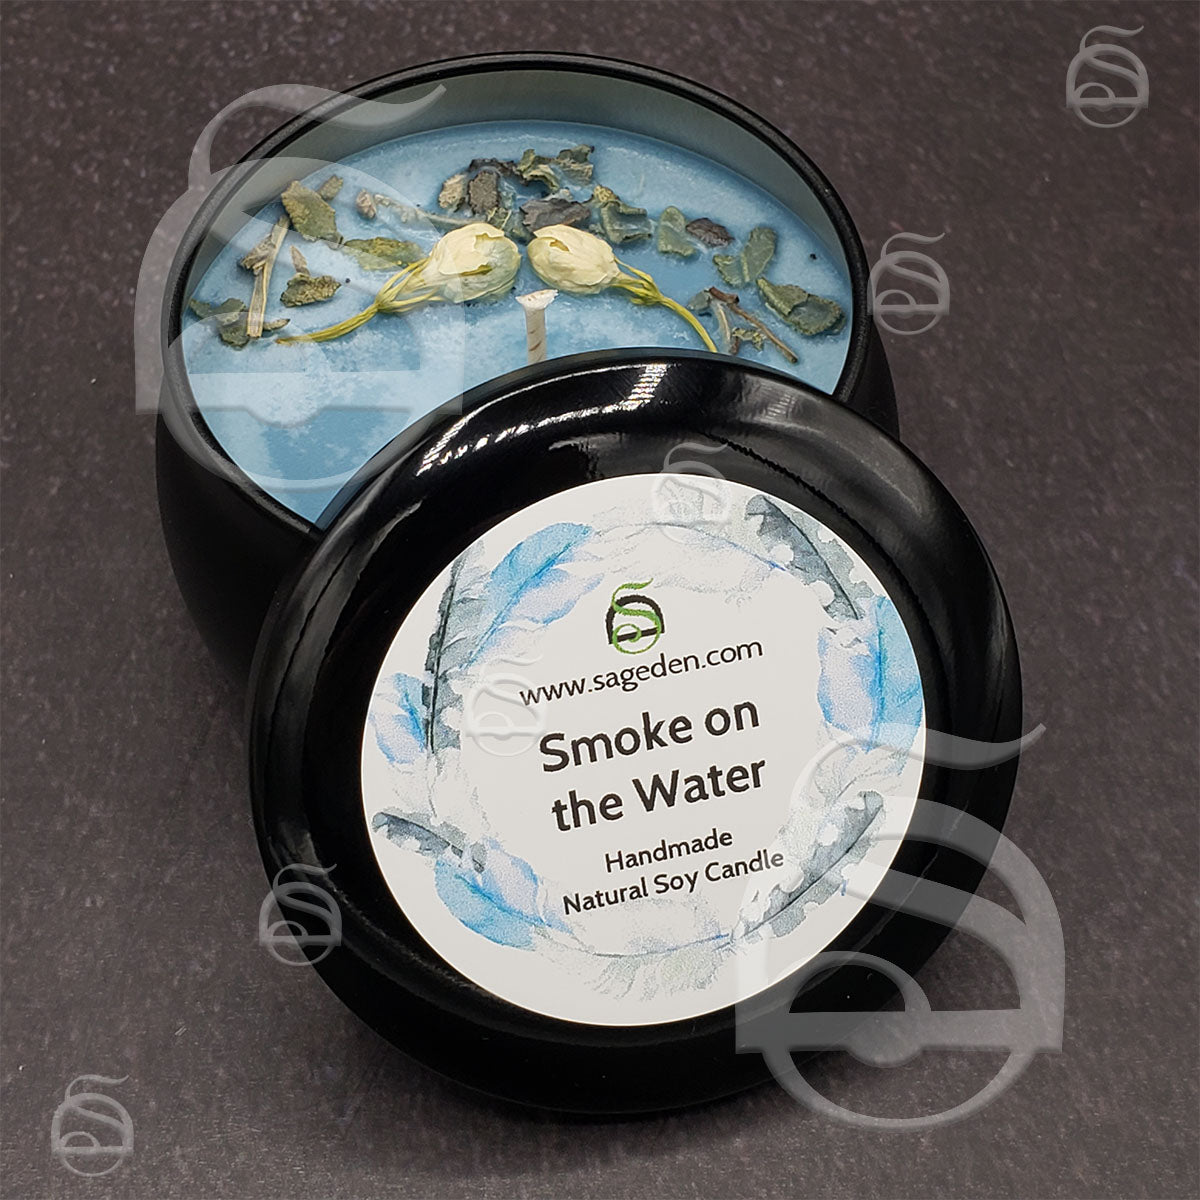 Smoke on the Water Candle & Wax Melt (Sage Den Product)